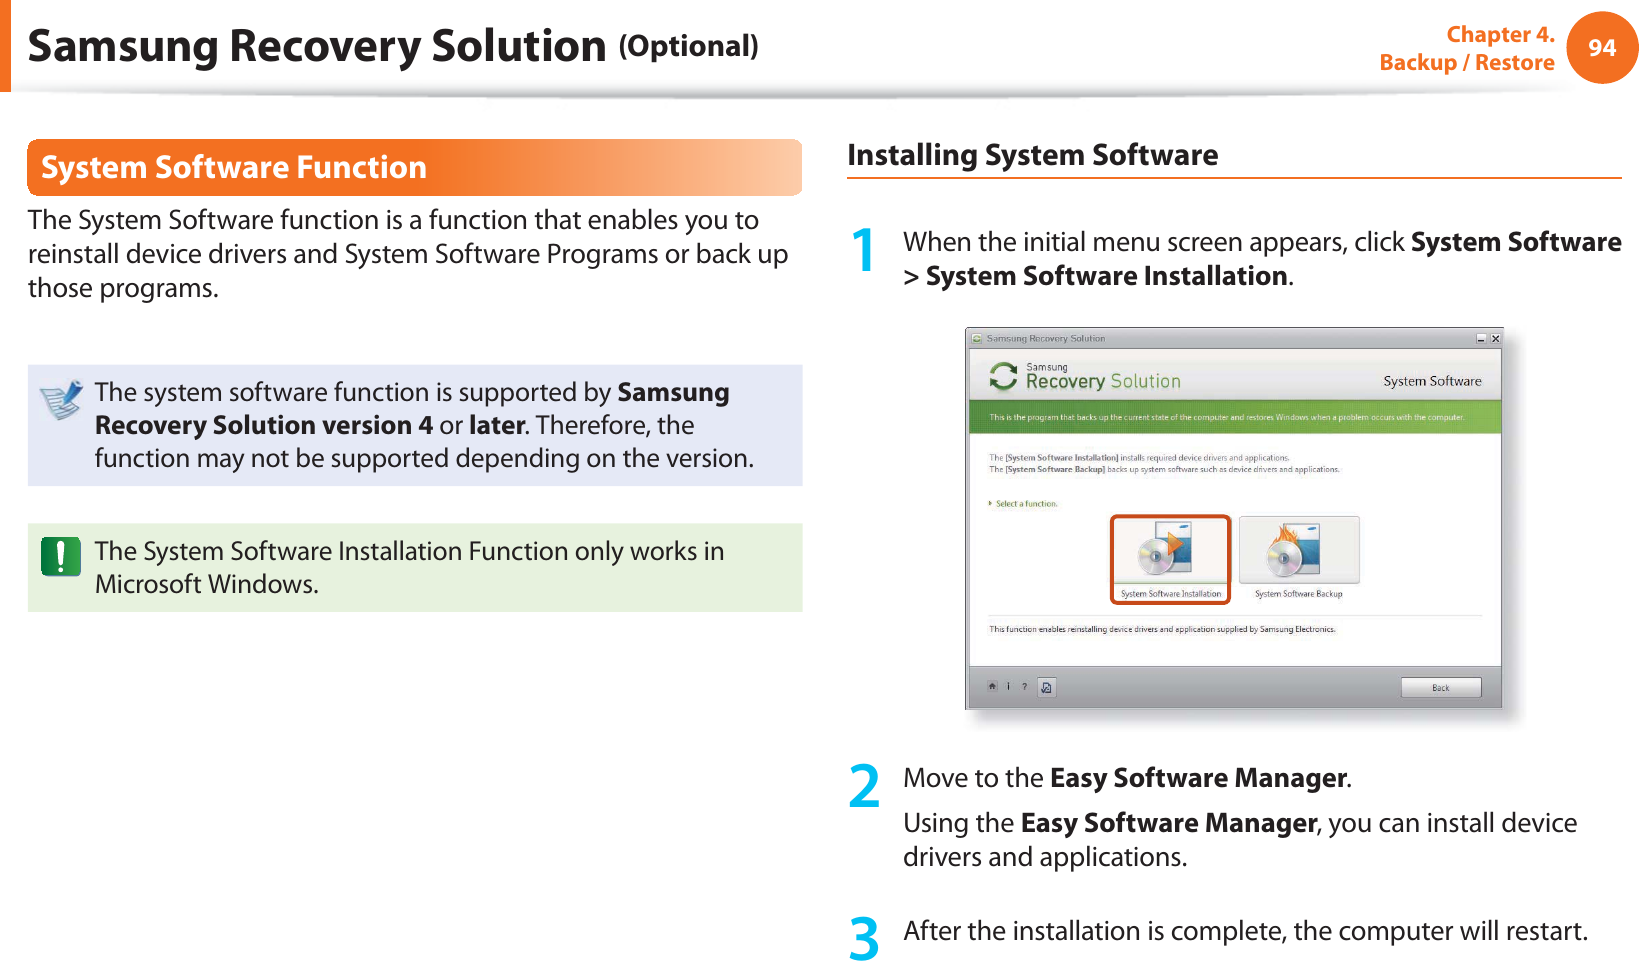 94Chapter 4.  Backup / RestoreSystem Software FunctionThe System Software function is a function that enables you to reinstall device drivers and System Software Programs or back up those programs. The system software function is supported by Samsung Recovery Solution version 4 or later. Therefore, the function may not be supported depending on the version.The System Software Installation Function only works in Microsoft Windows.Installing System Software1  When the initial menu screen appears, click System Software &gt; System Software Installation.2  Move to the Easy Software Manager. Using the Easy Software Manager, you can install device drivers and applications.3  After the installation is complete, the computer will restart.Samsung Recovery Solution (Optional)